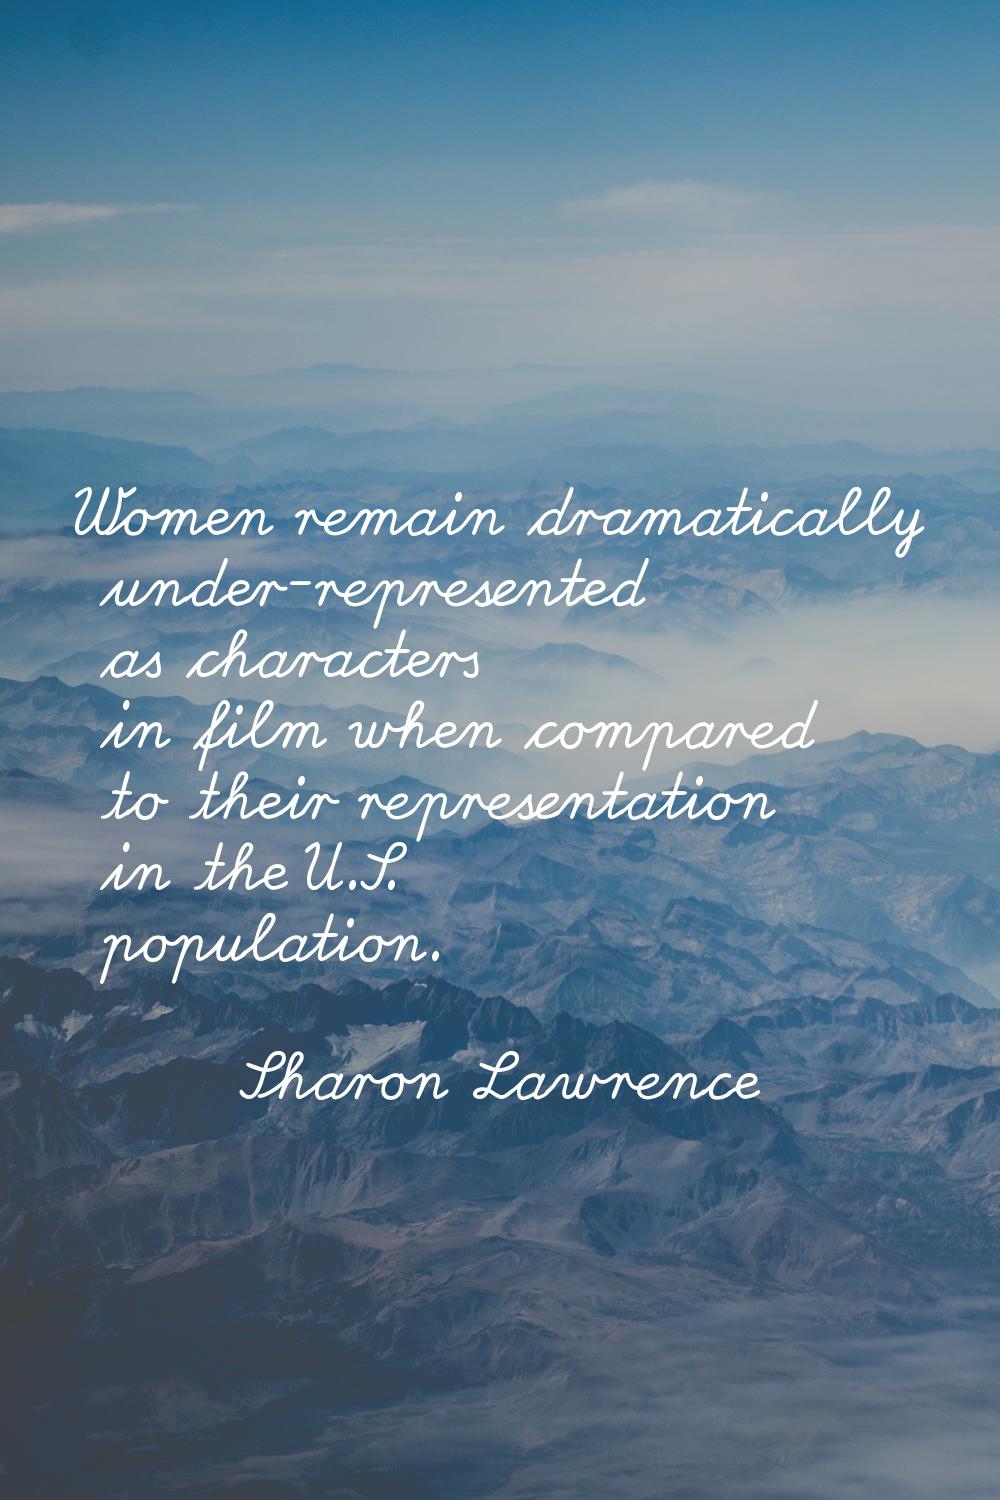 Women remain dramatically under-represented as characters in film when compared to their representa